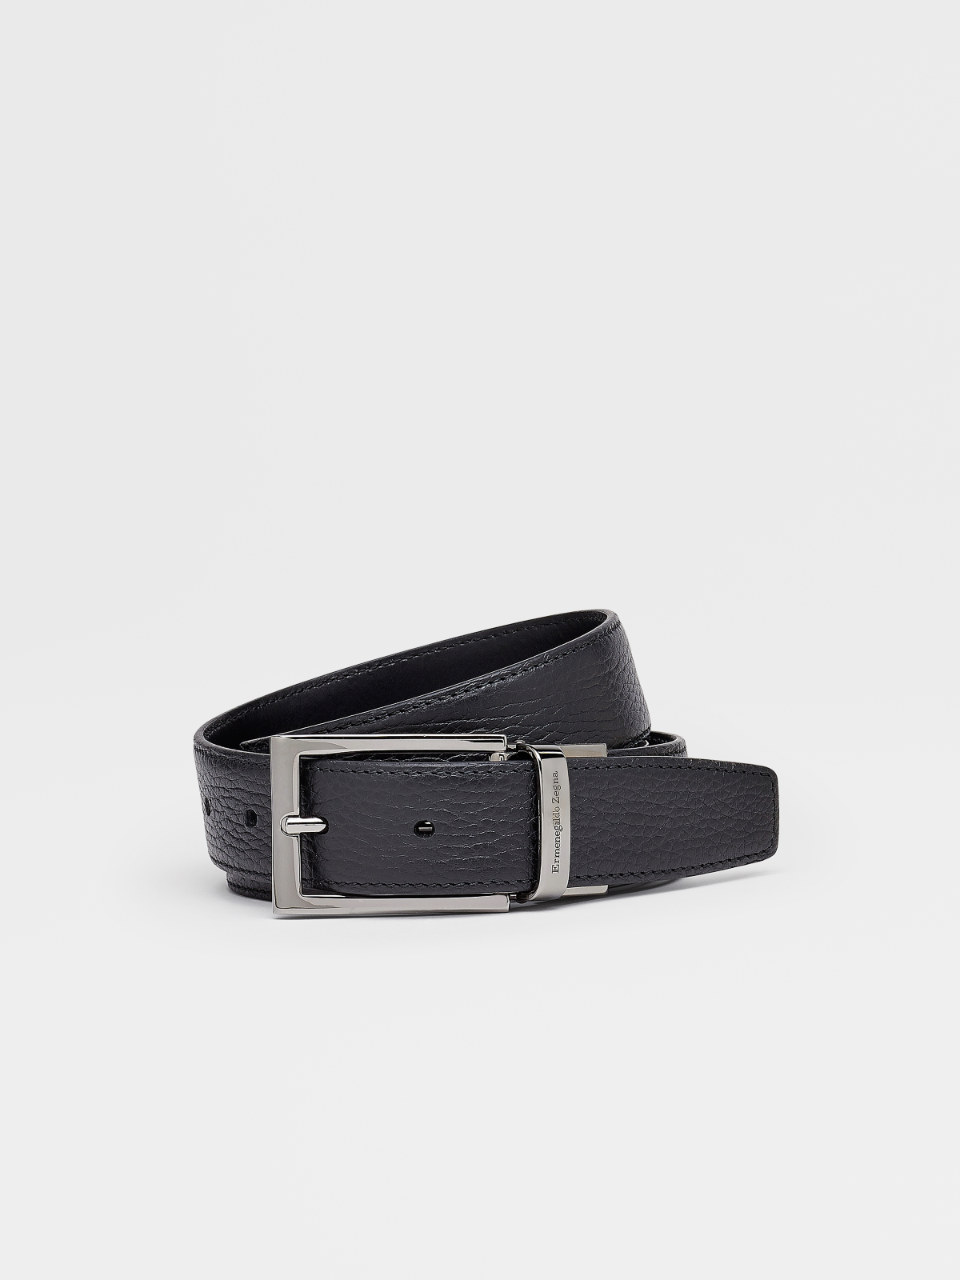 Black Grained Leather and Black Leather Reversible Belt